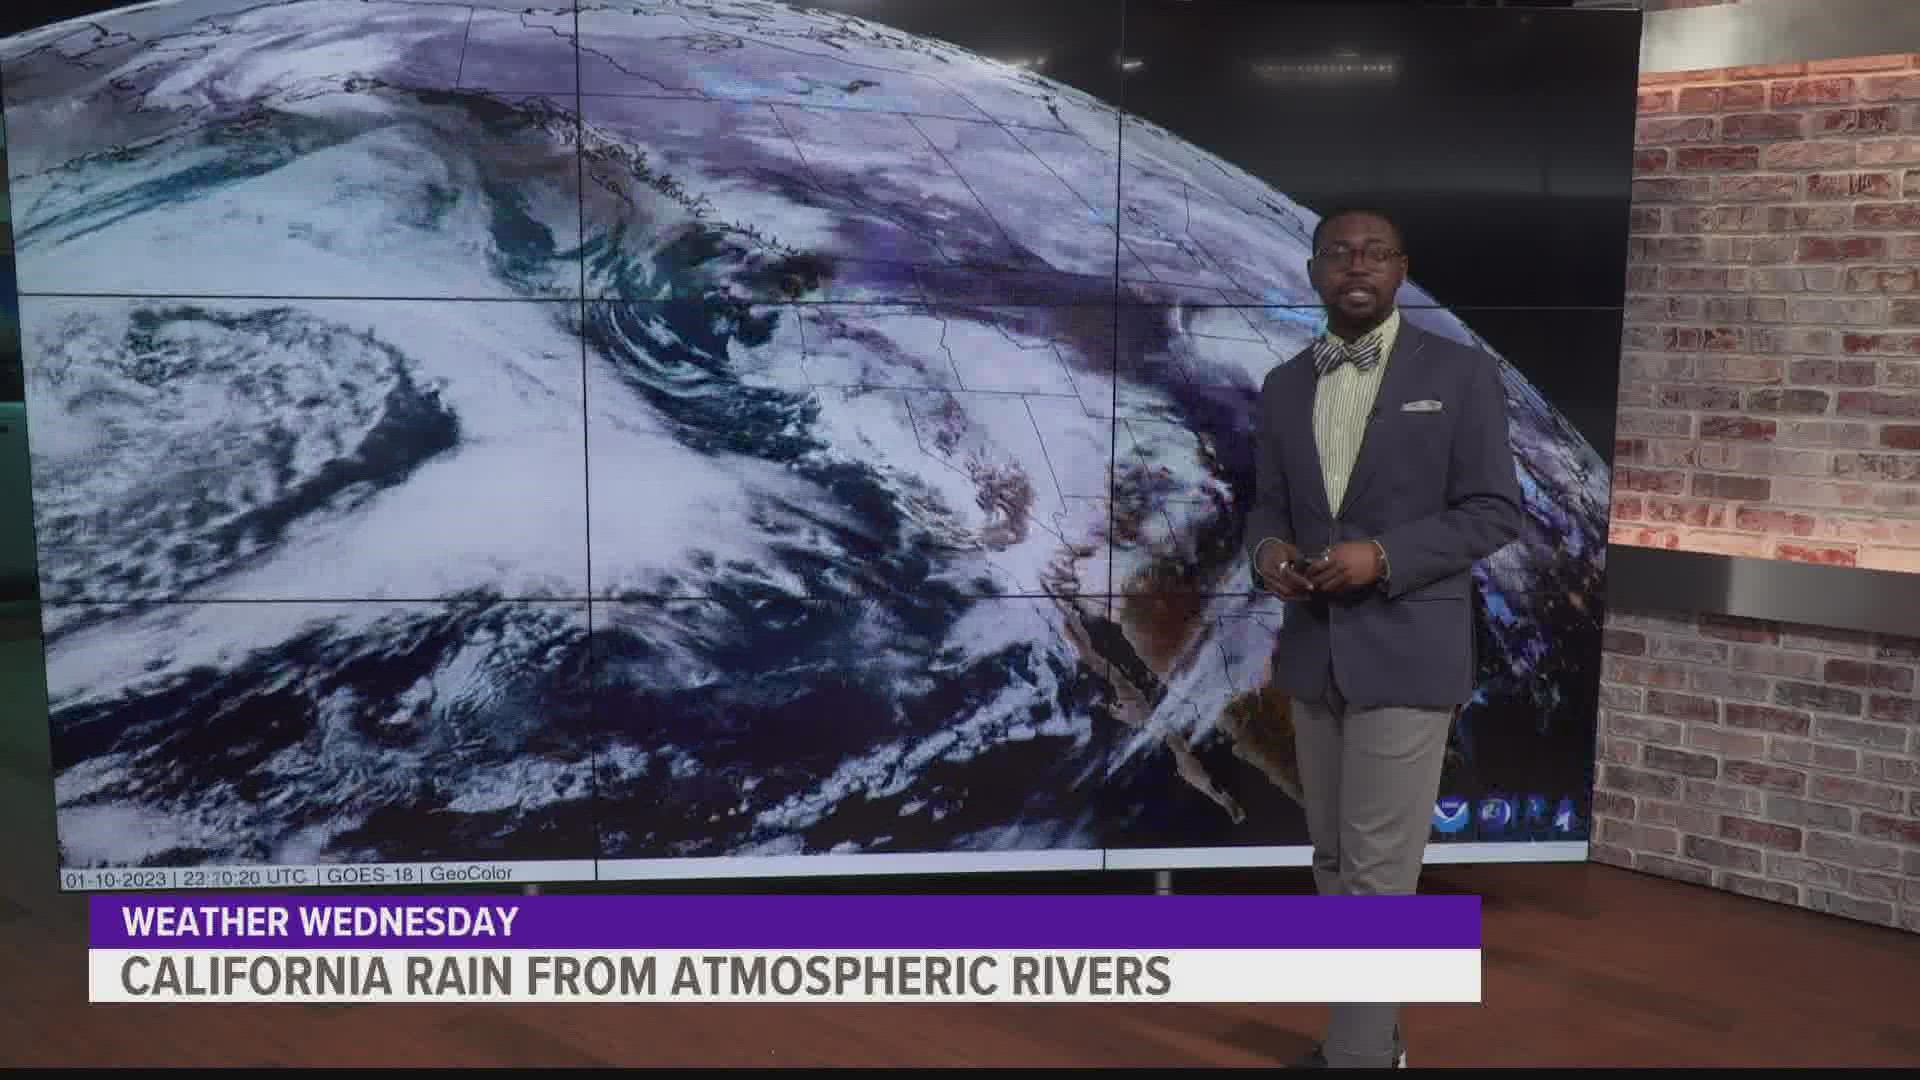 Find out about the weather pattern that's leaving the West Coast soaked.